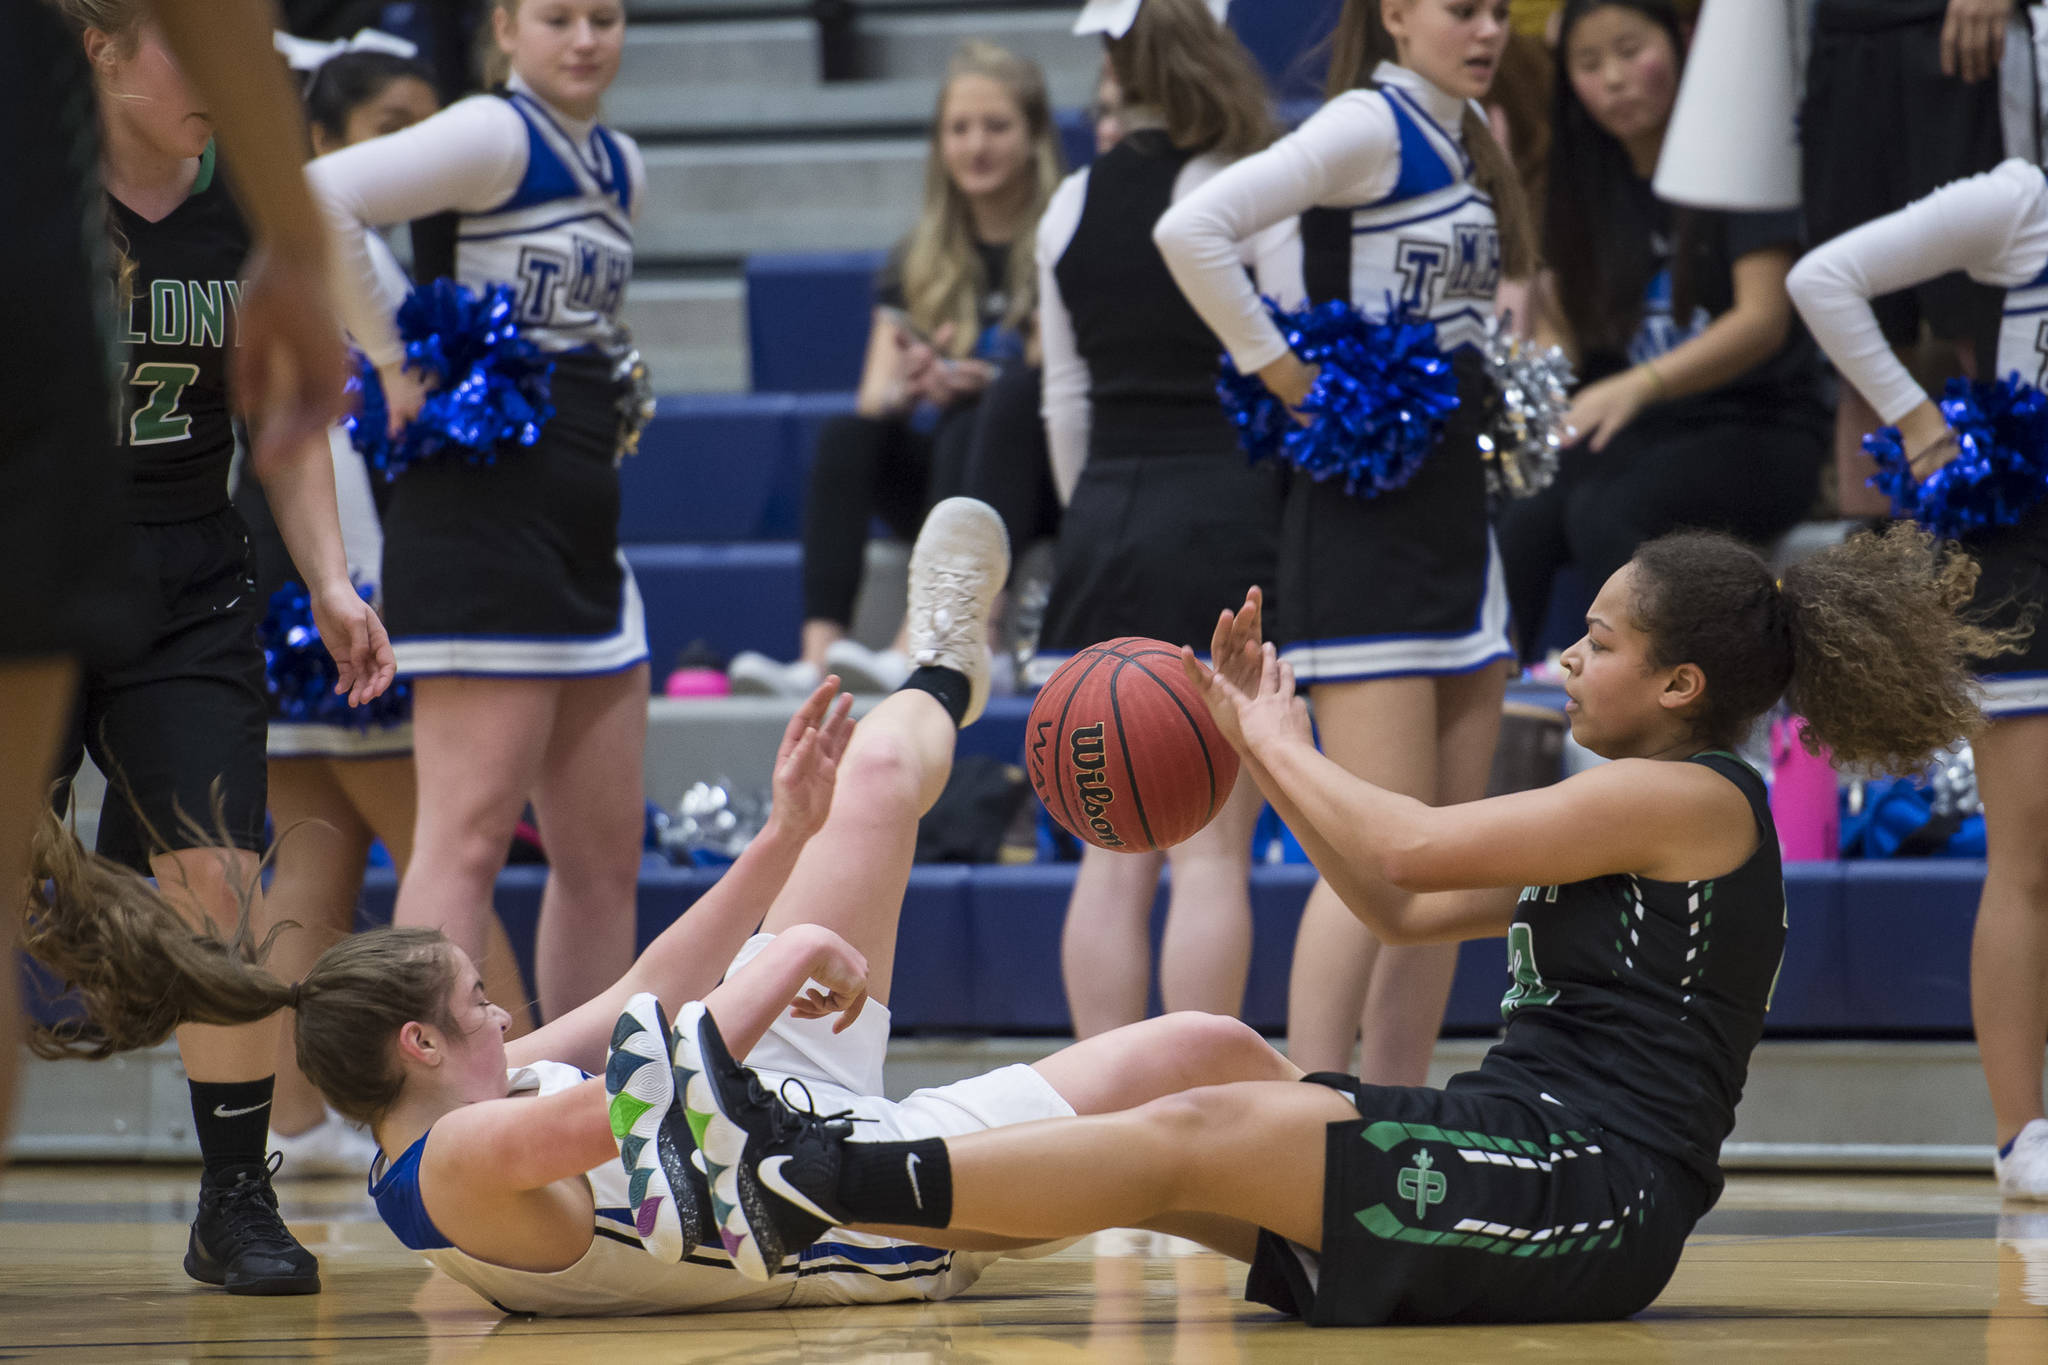 Thunder Mountain’s Samantha Dilley, left, and Colony’s Kali Bull go to the floor after a loose ball at TMHS on Friday, Jan. 11, 2019. Colony won 58-28. (Michael Penn | Juneau Empire)